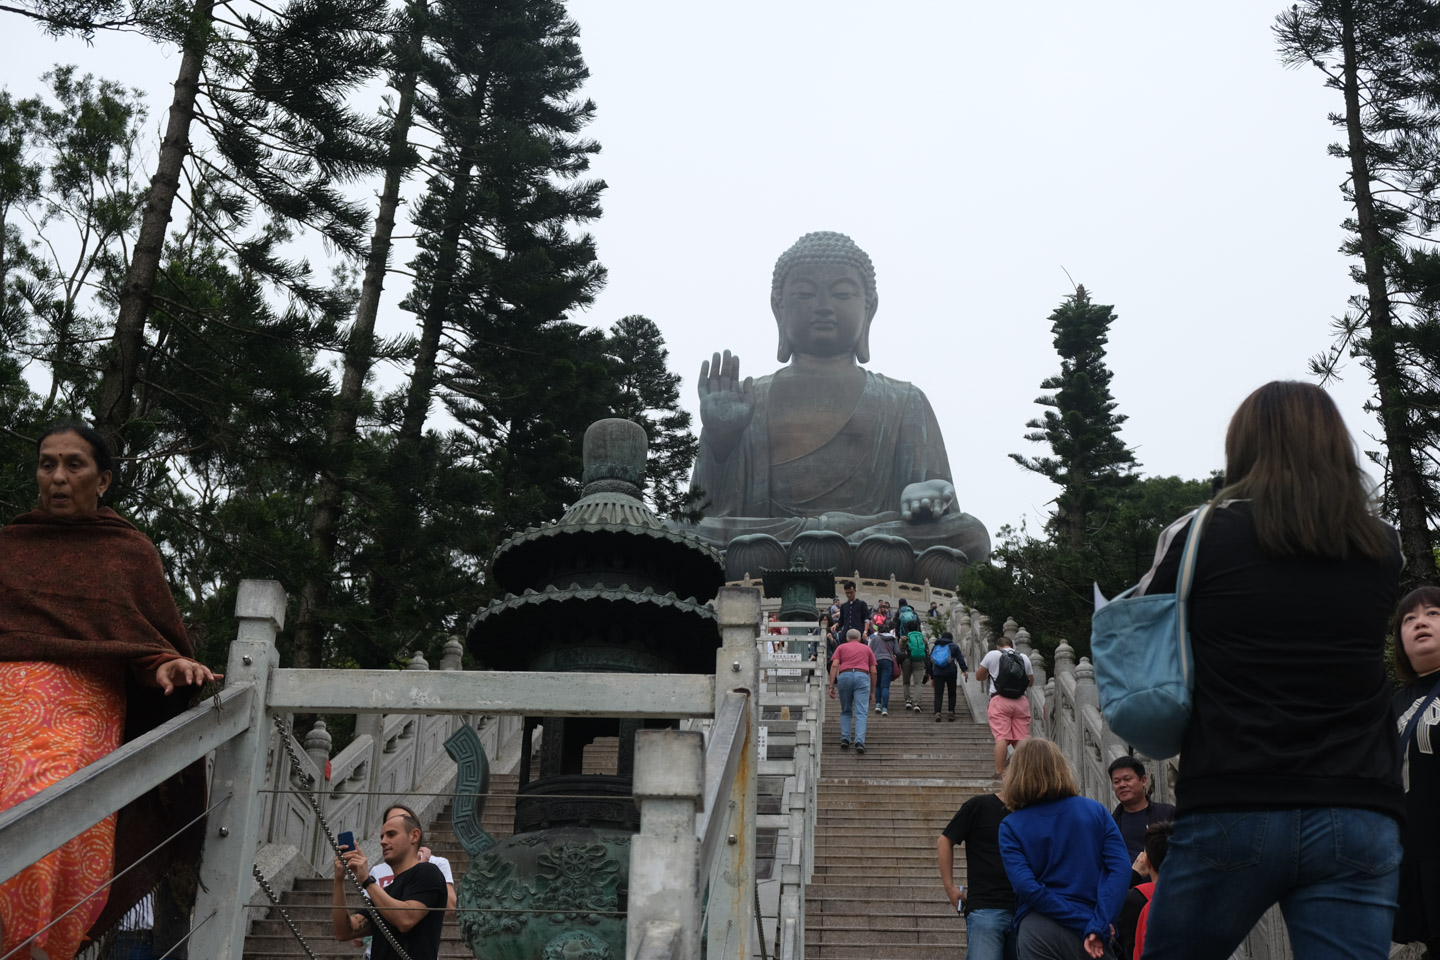 The stairs up to the Tian Tan Buddha